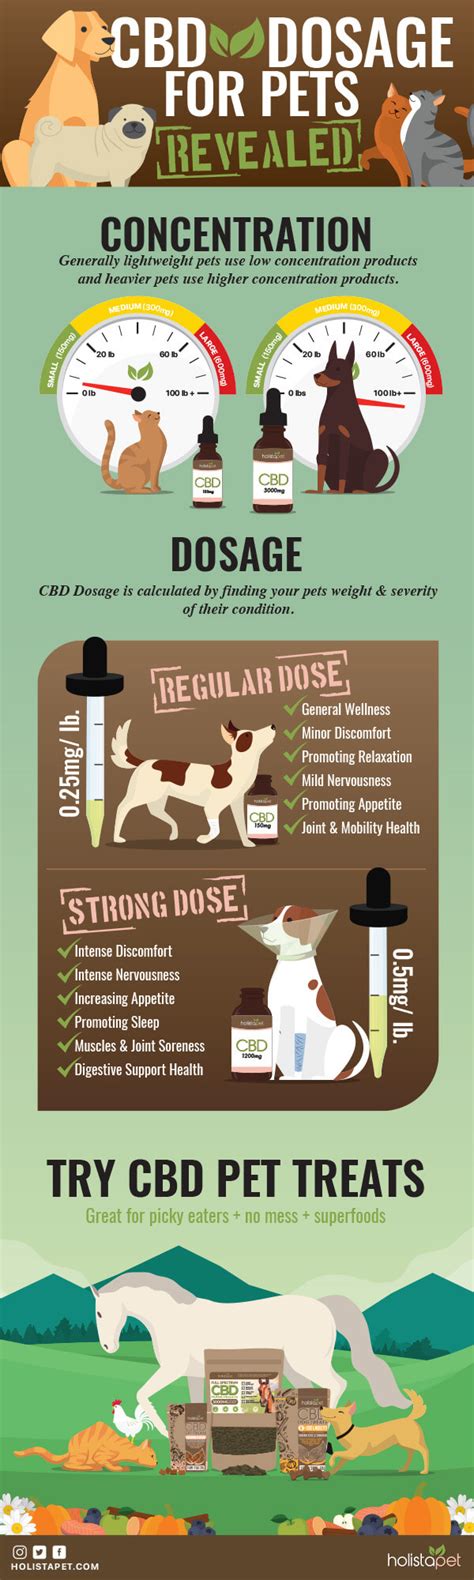 How Much Cbd Should I Give My Nervous Dog